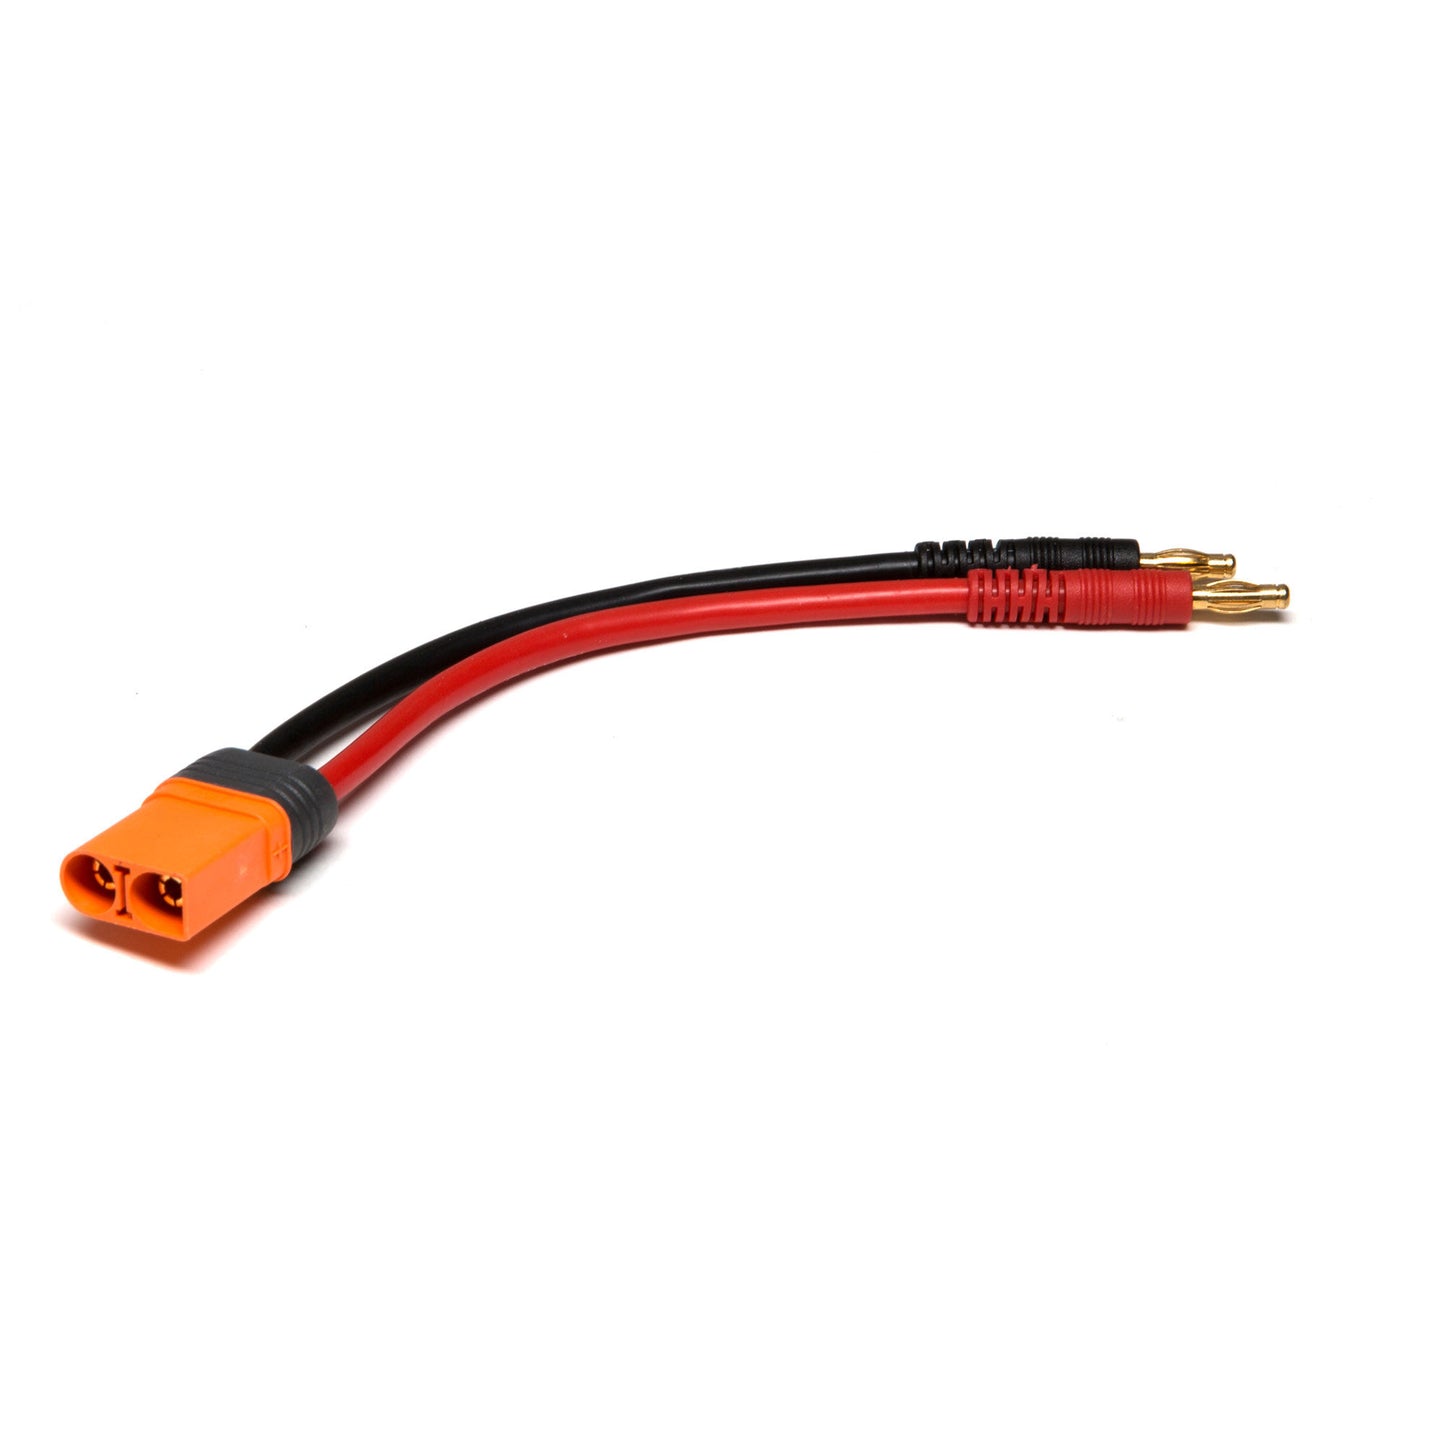 SPMXCA504 IC5 Device Charge Lead 4mm Blt